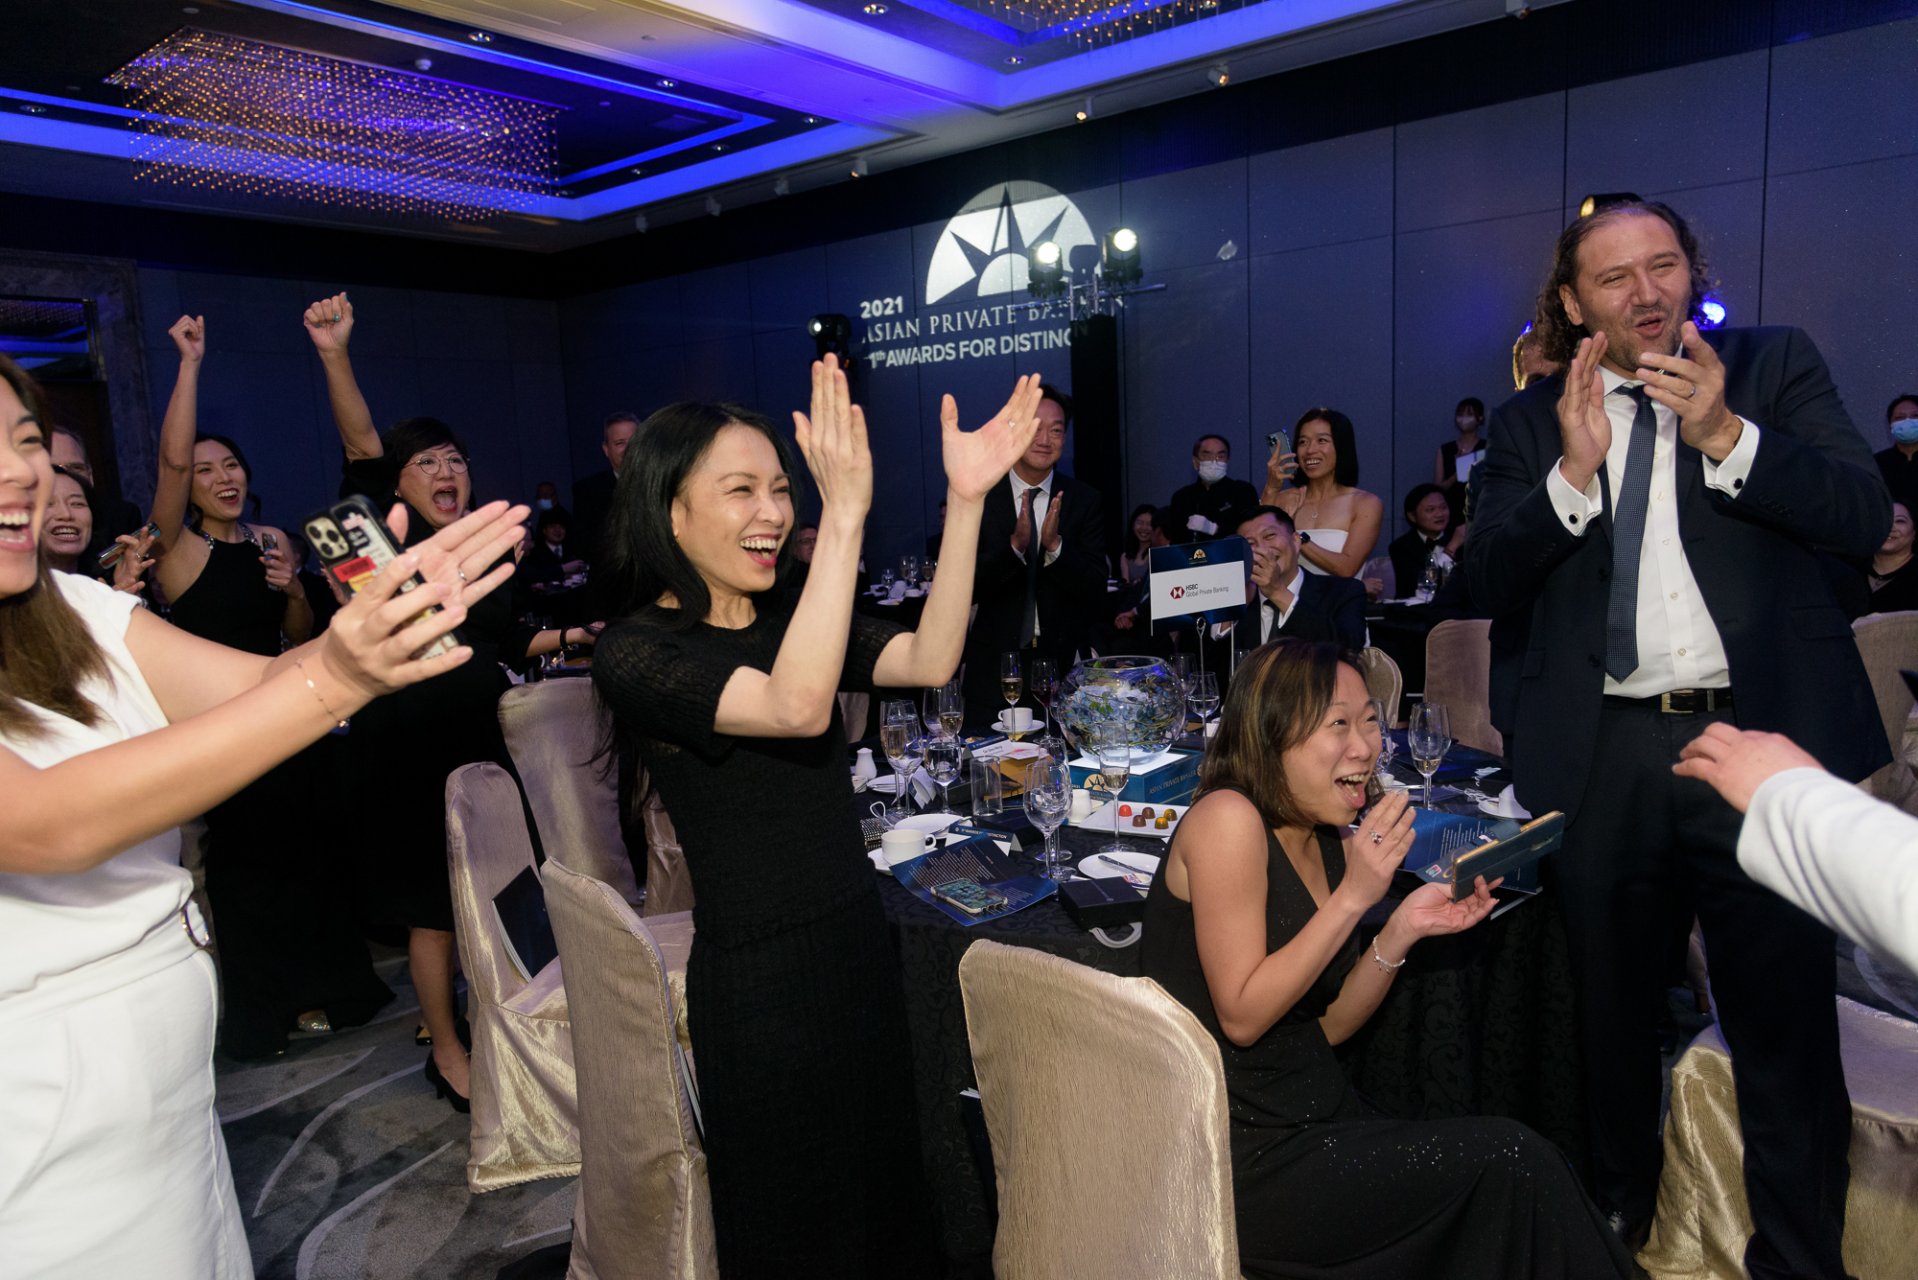 HSBC Global Private Banking celebrating their wins at the 11th Awards for Distinction